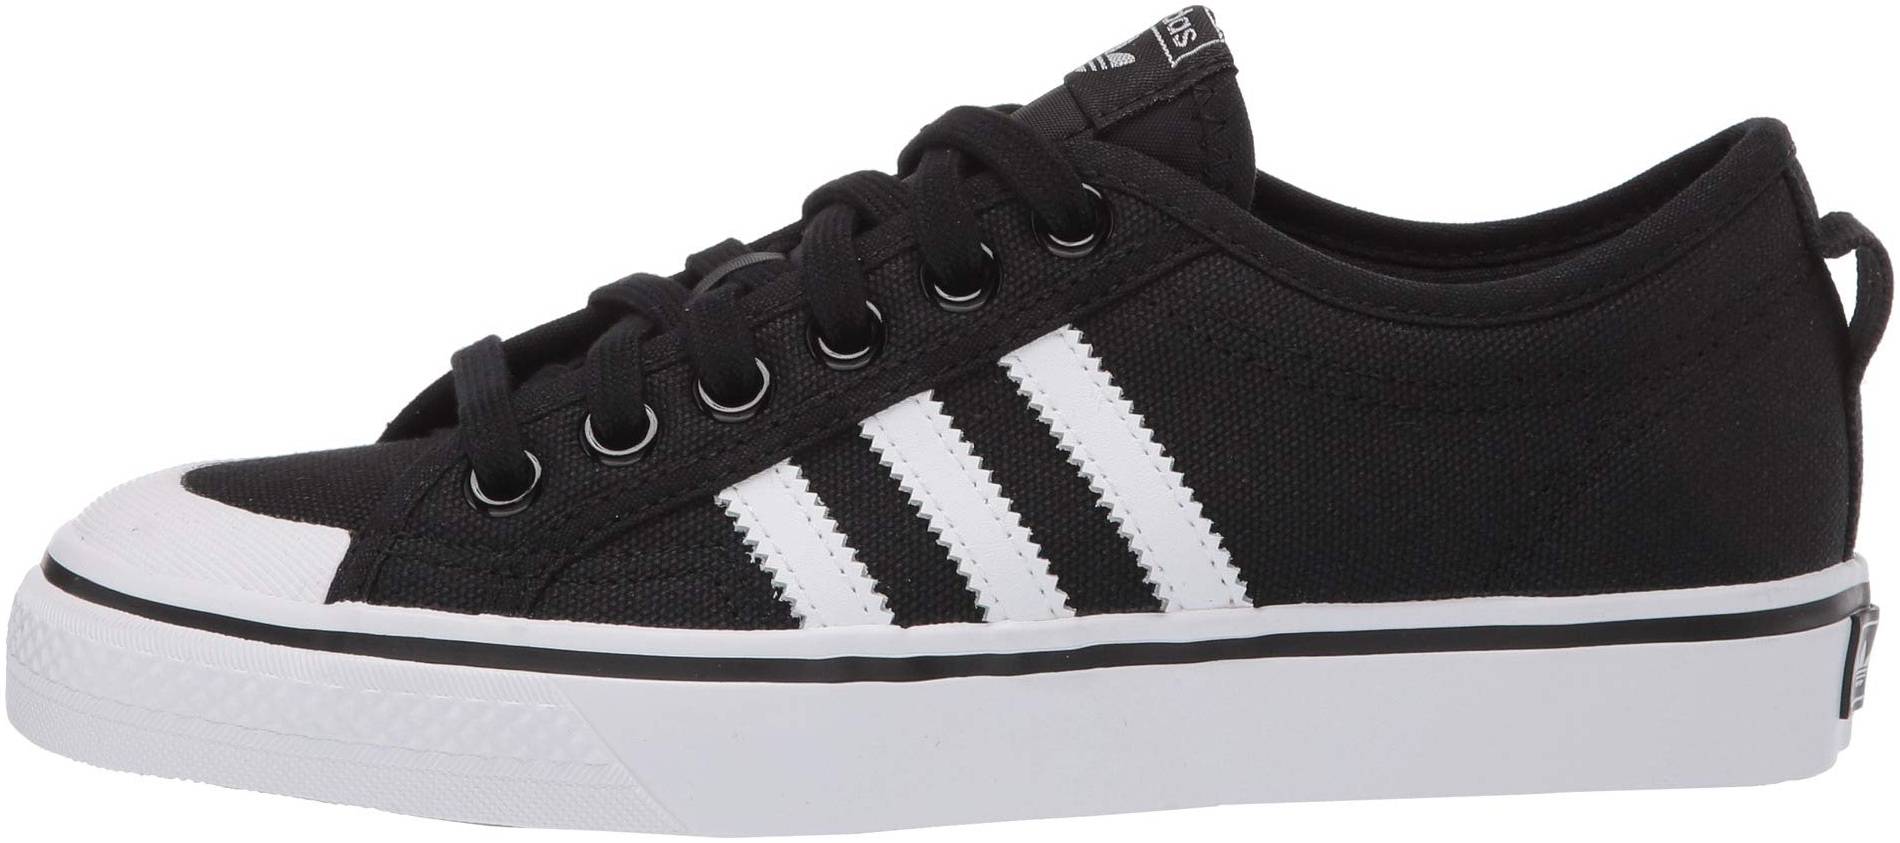 accept What's wrong Try Adidas Nizza Low sneakers in 10+ colors (only $20) | RunRepeat